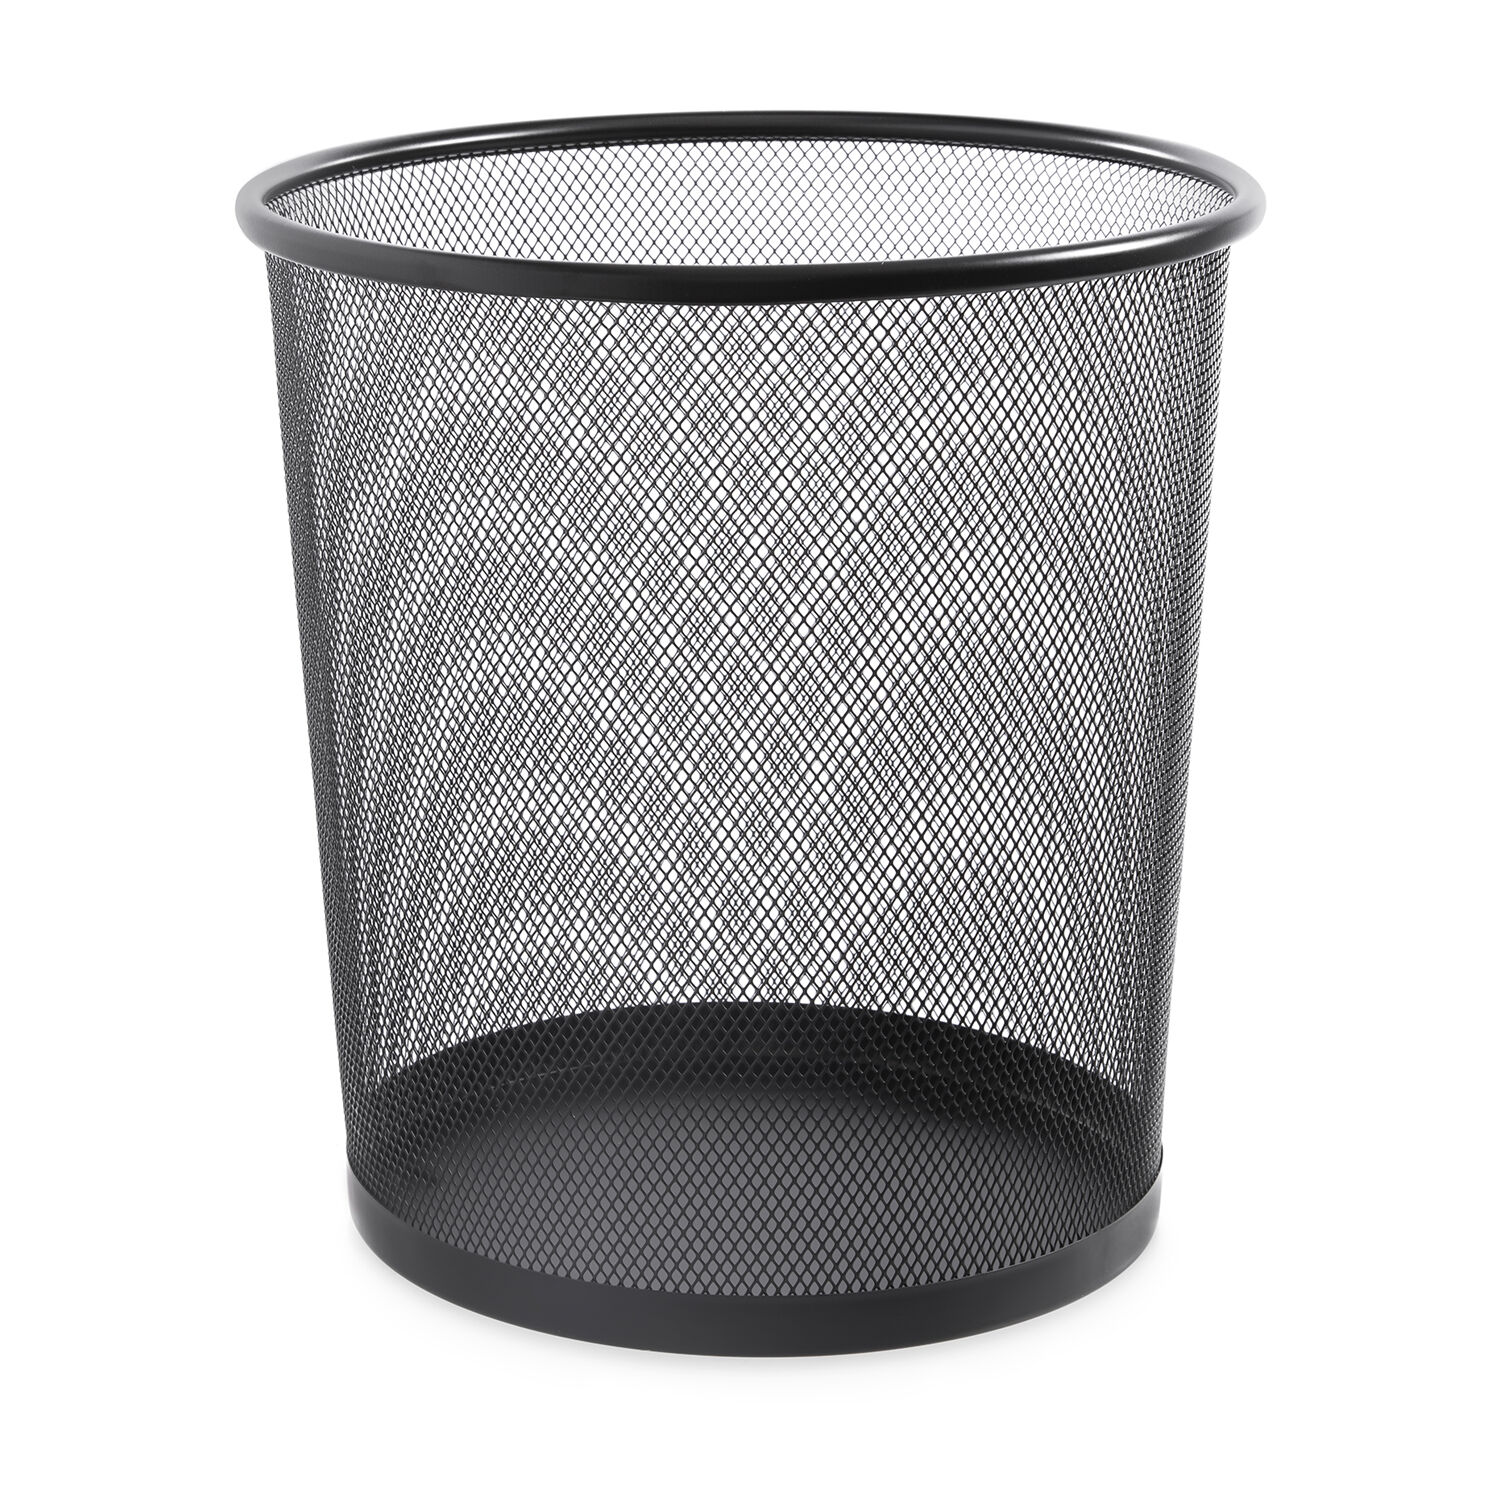 METAL MESH WASTE PAPER BIN FOR OFFICE HOME USE BEDROOM LIGHTWEIGHT AND STURDY 